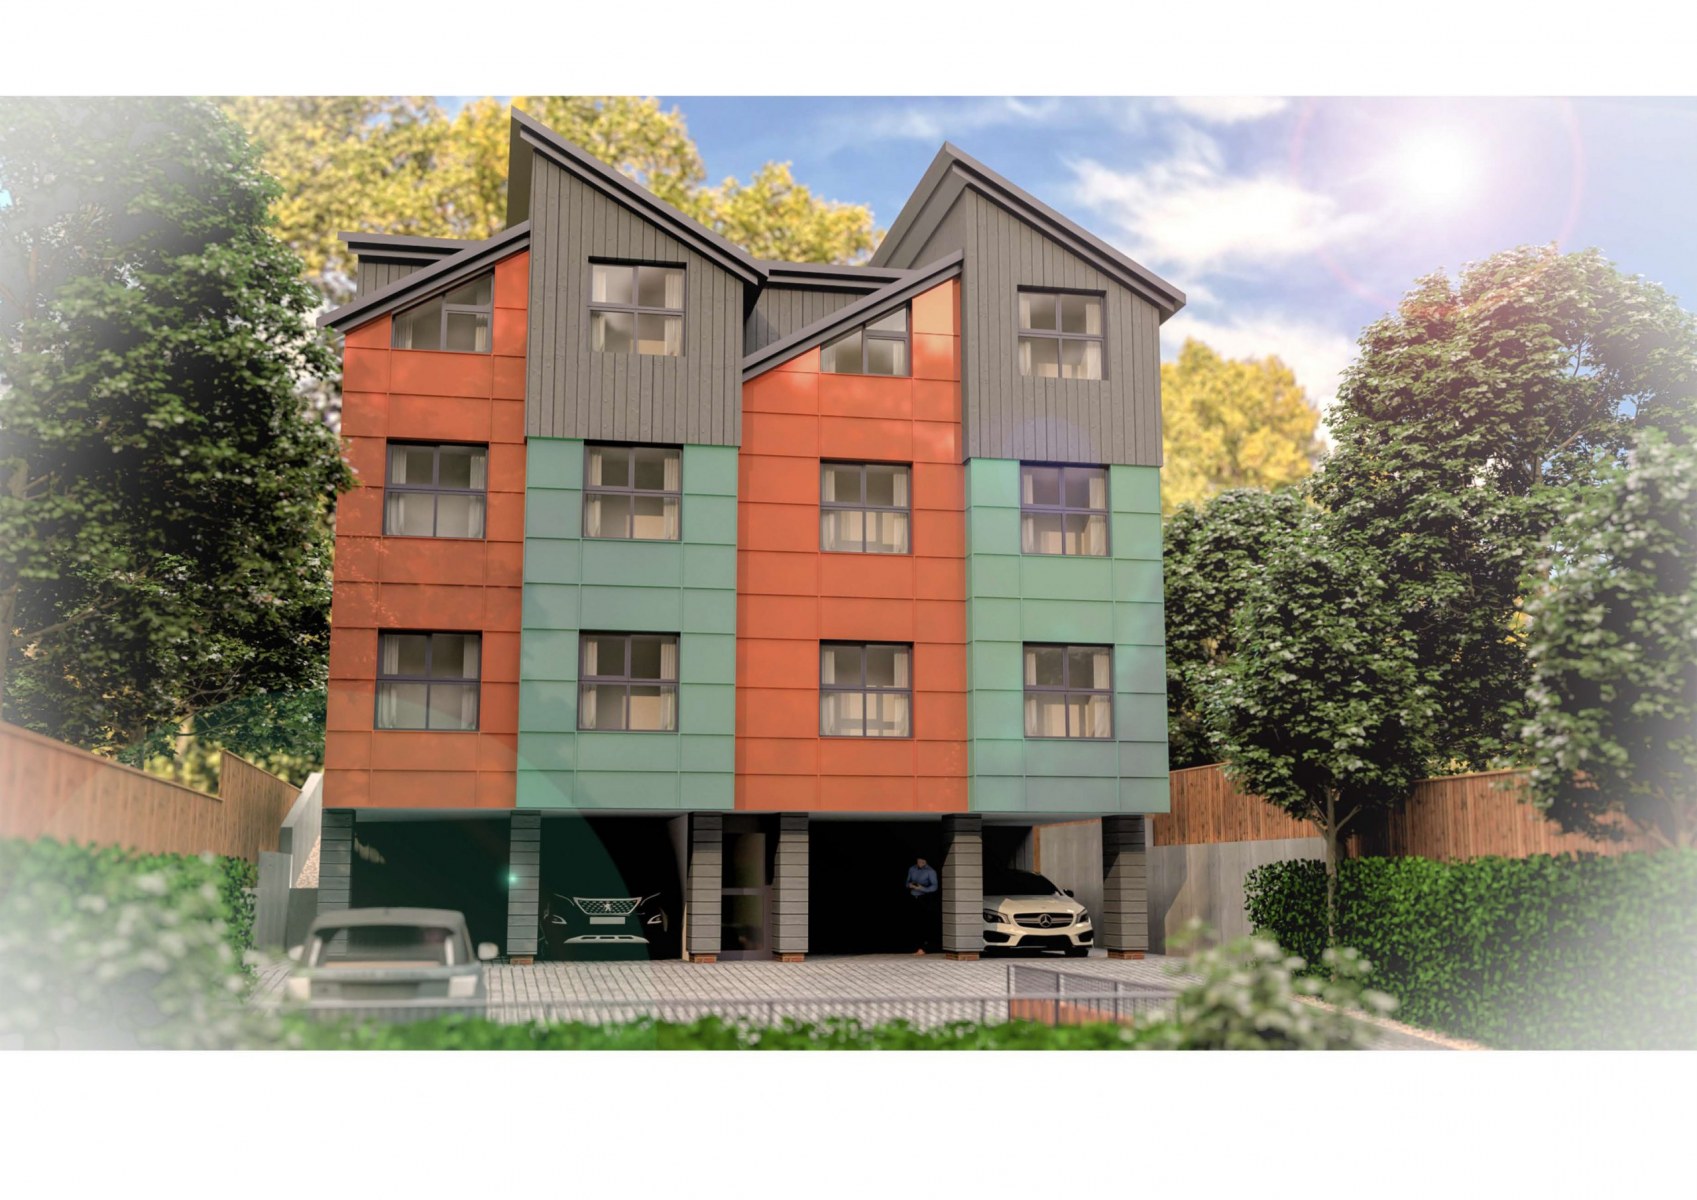 Modern scheme for 6, 2 bed apartments in High Wycombe